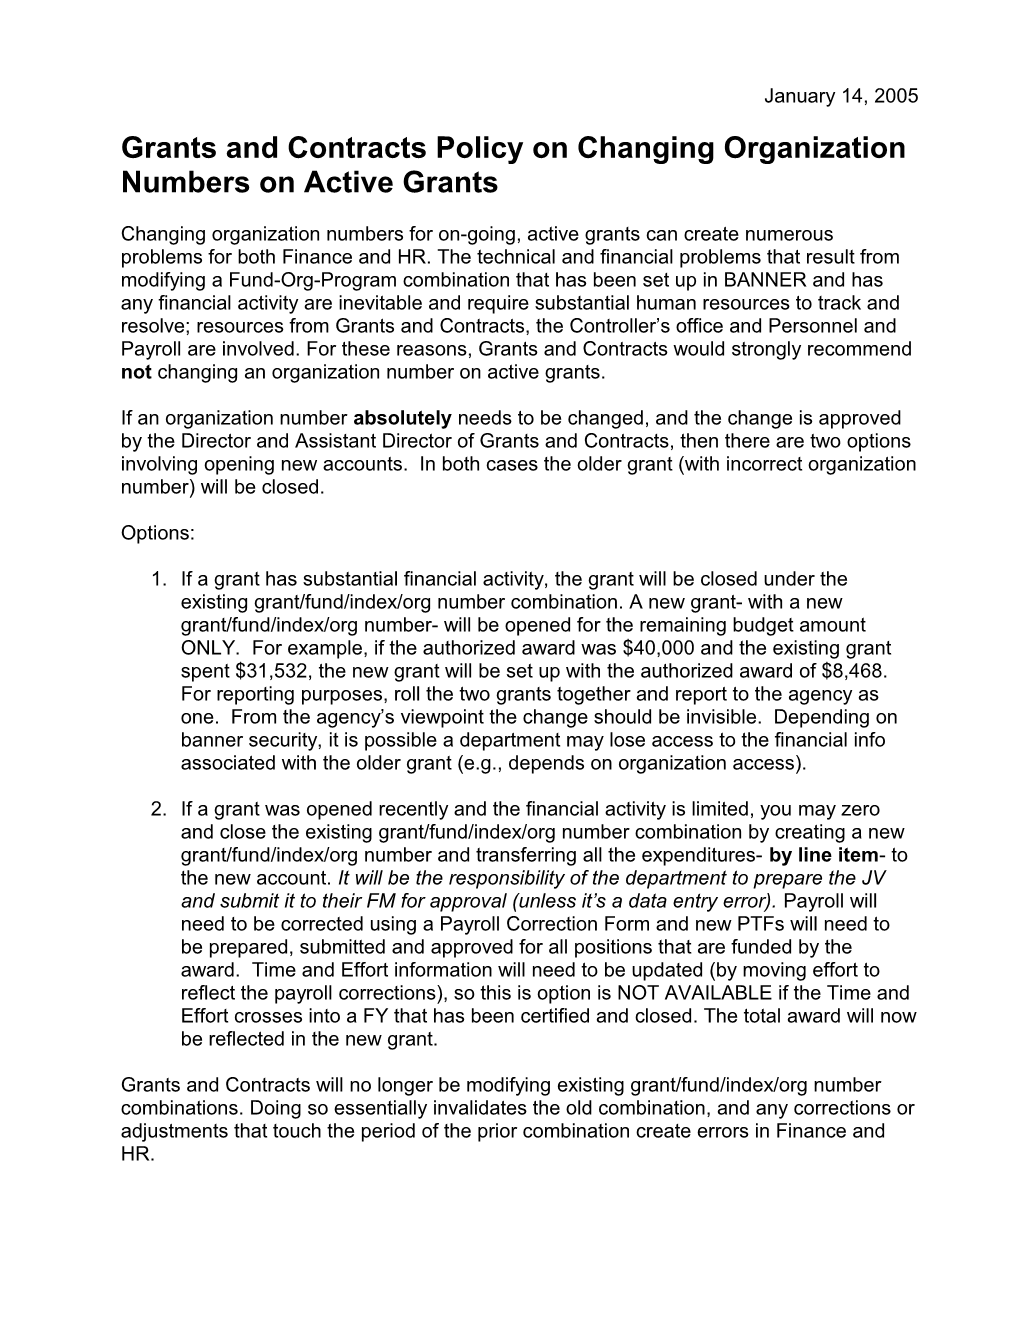 Grants and Contracts Policy on Changing Organization Numbers on Active Grants